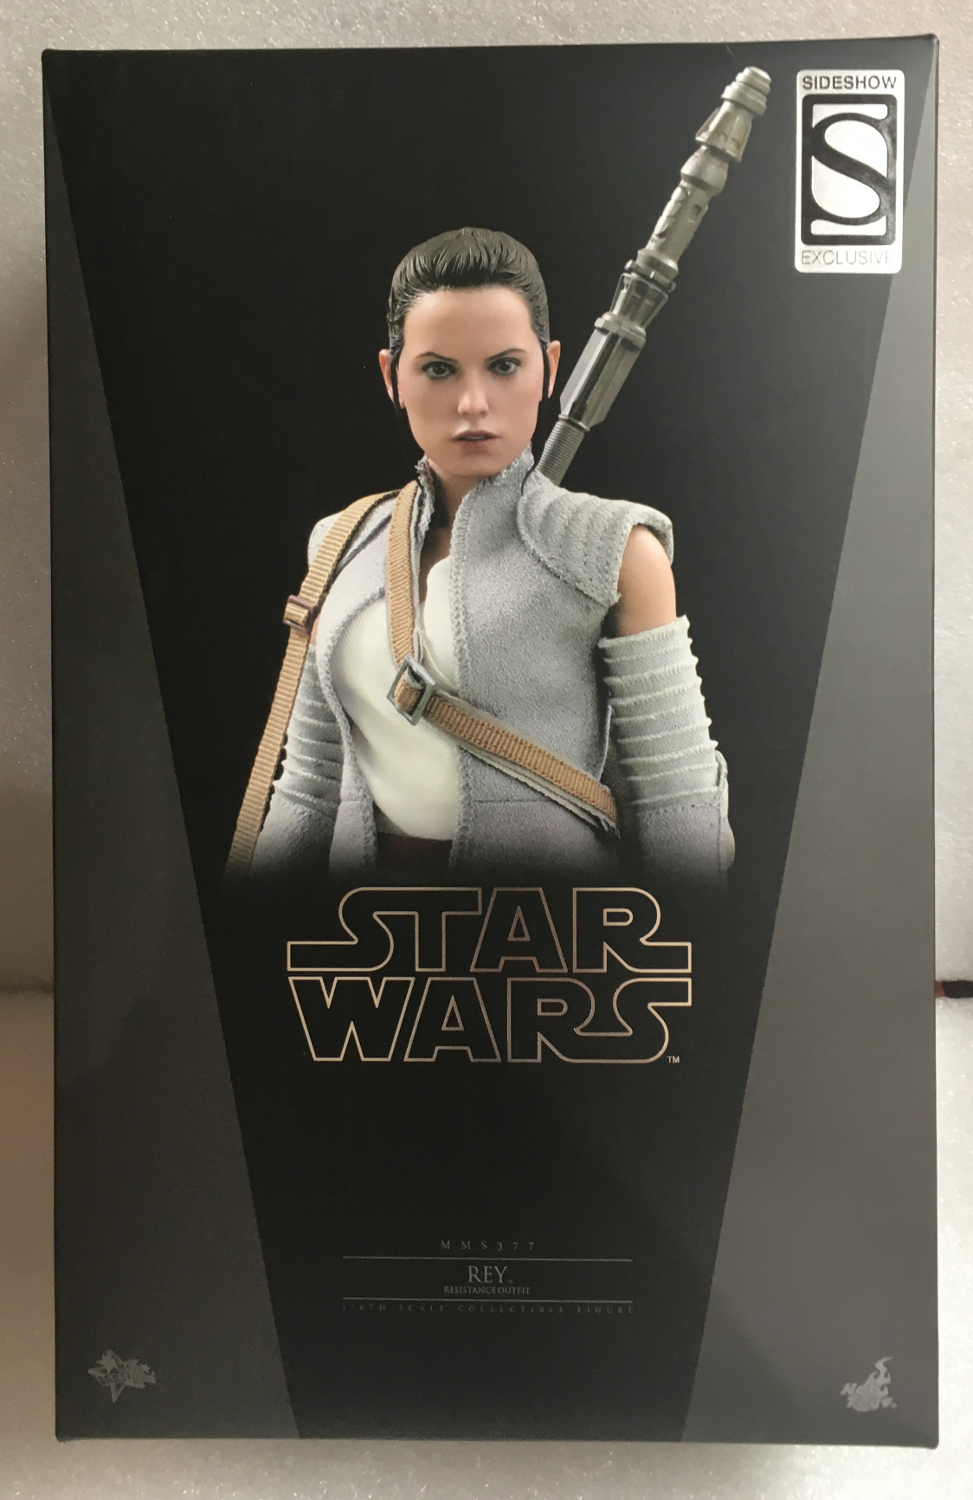 New in stock Star Wars The Force Awakens Rey Resistance Outfit action figure